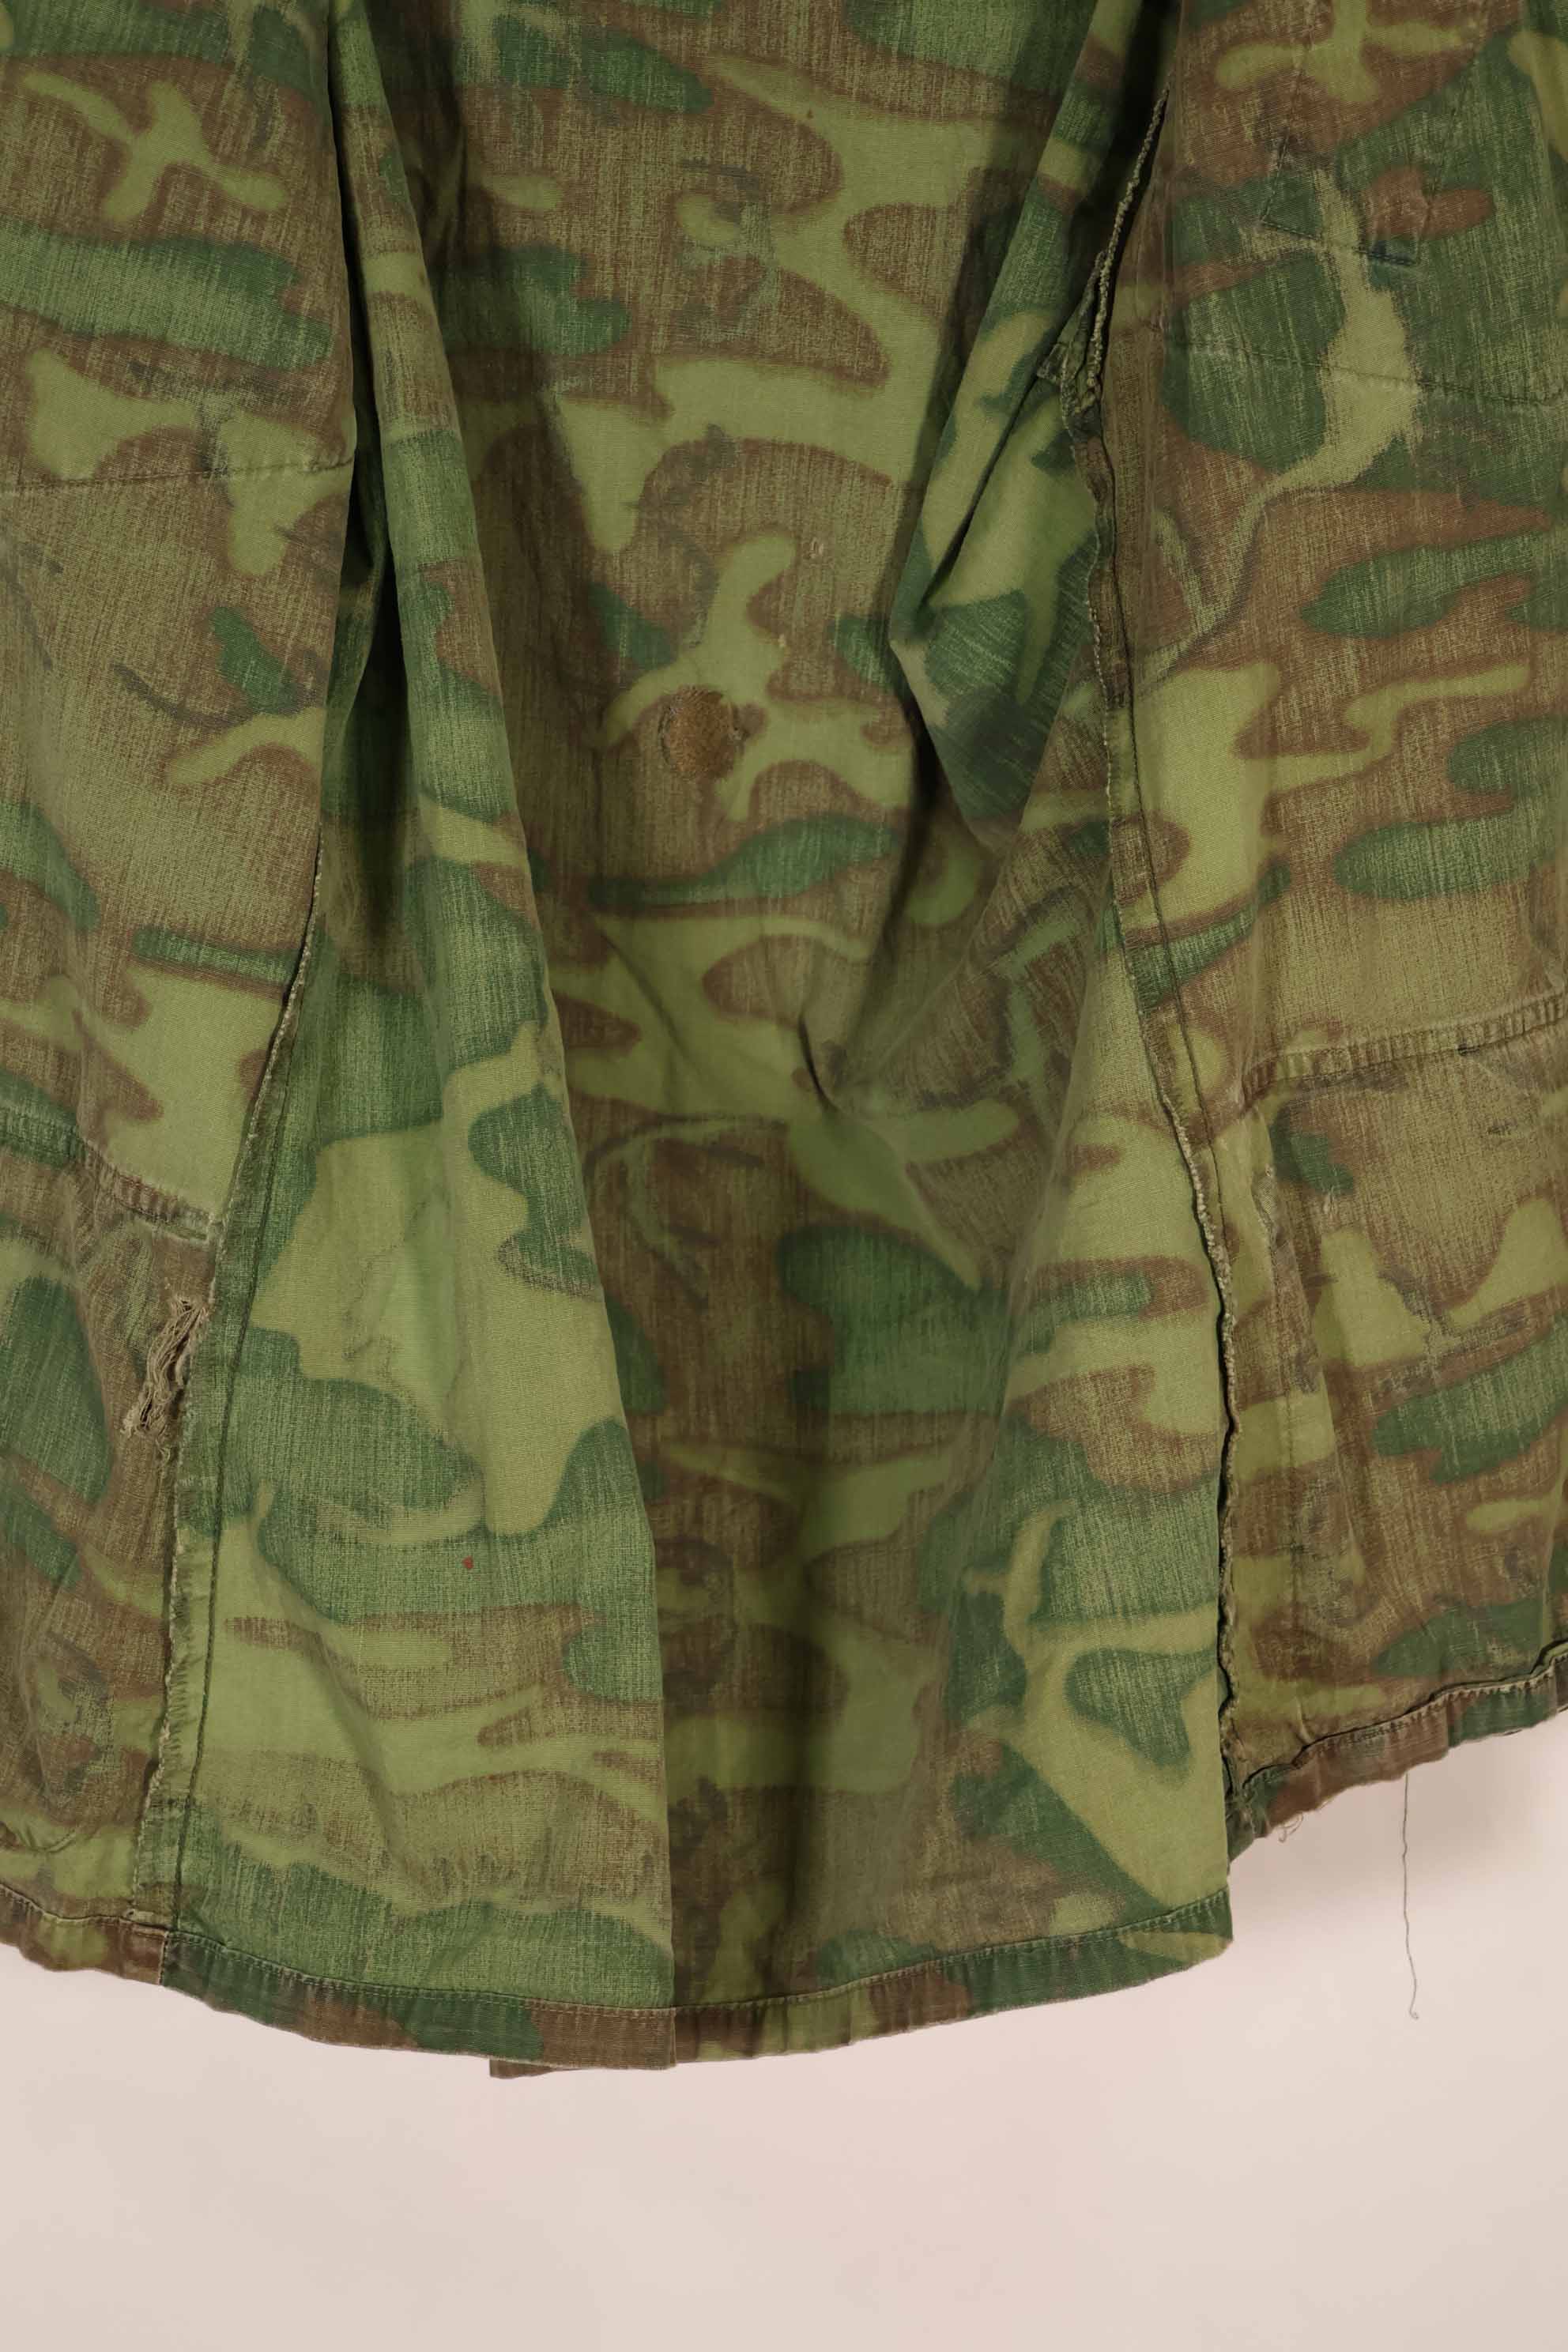 Real non ripstop fabric ERDL jungle fatigues jacket, used, no tags.